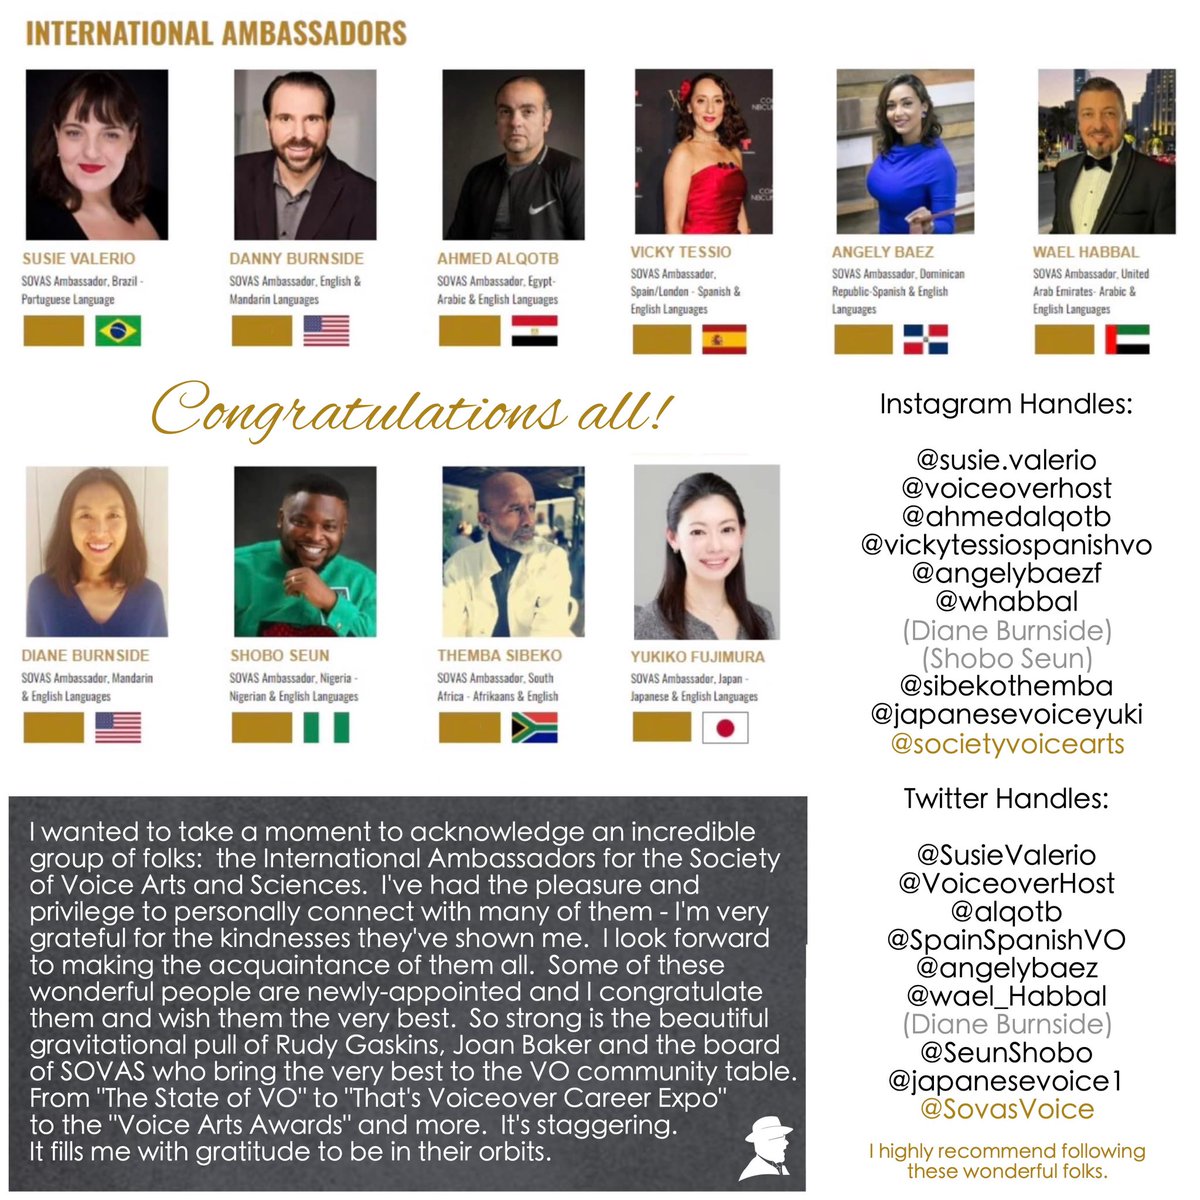 Congrats all! Spotlighting an incredible group of folks: the @SovasVoice International Ambassadors. I've had the pleasure & privilege to personally connect w/ many of them - I'm grateful for the kindnesses they've shown me. I look forward to making the acquaintance of them all.